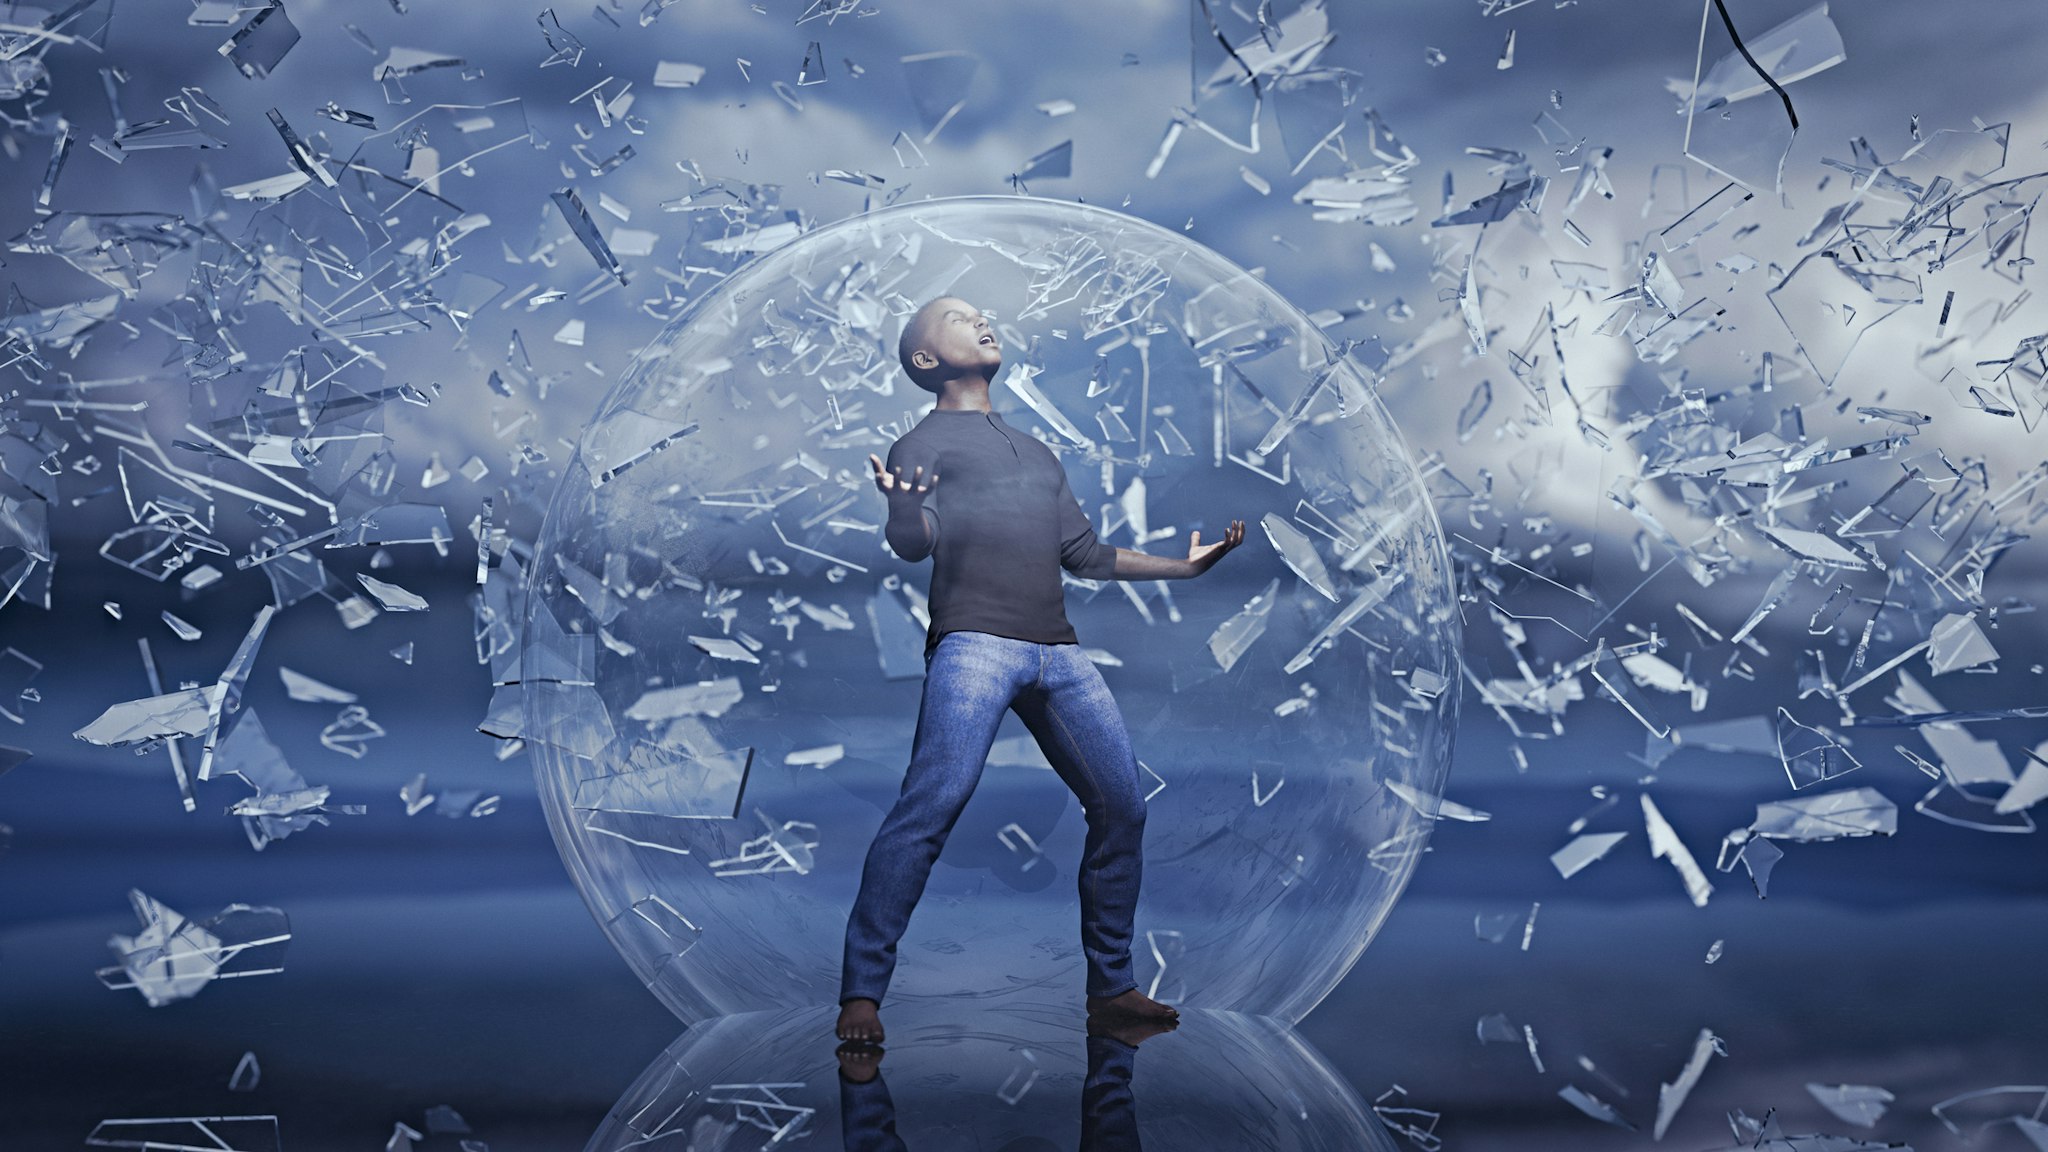 Man standing in sphere protected from falling shards of glass - stock photo